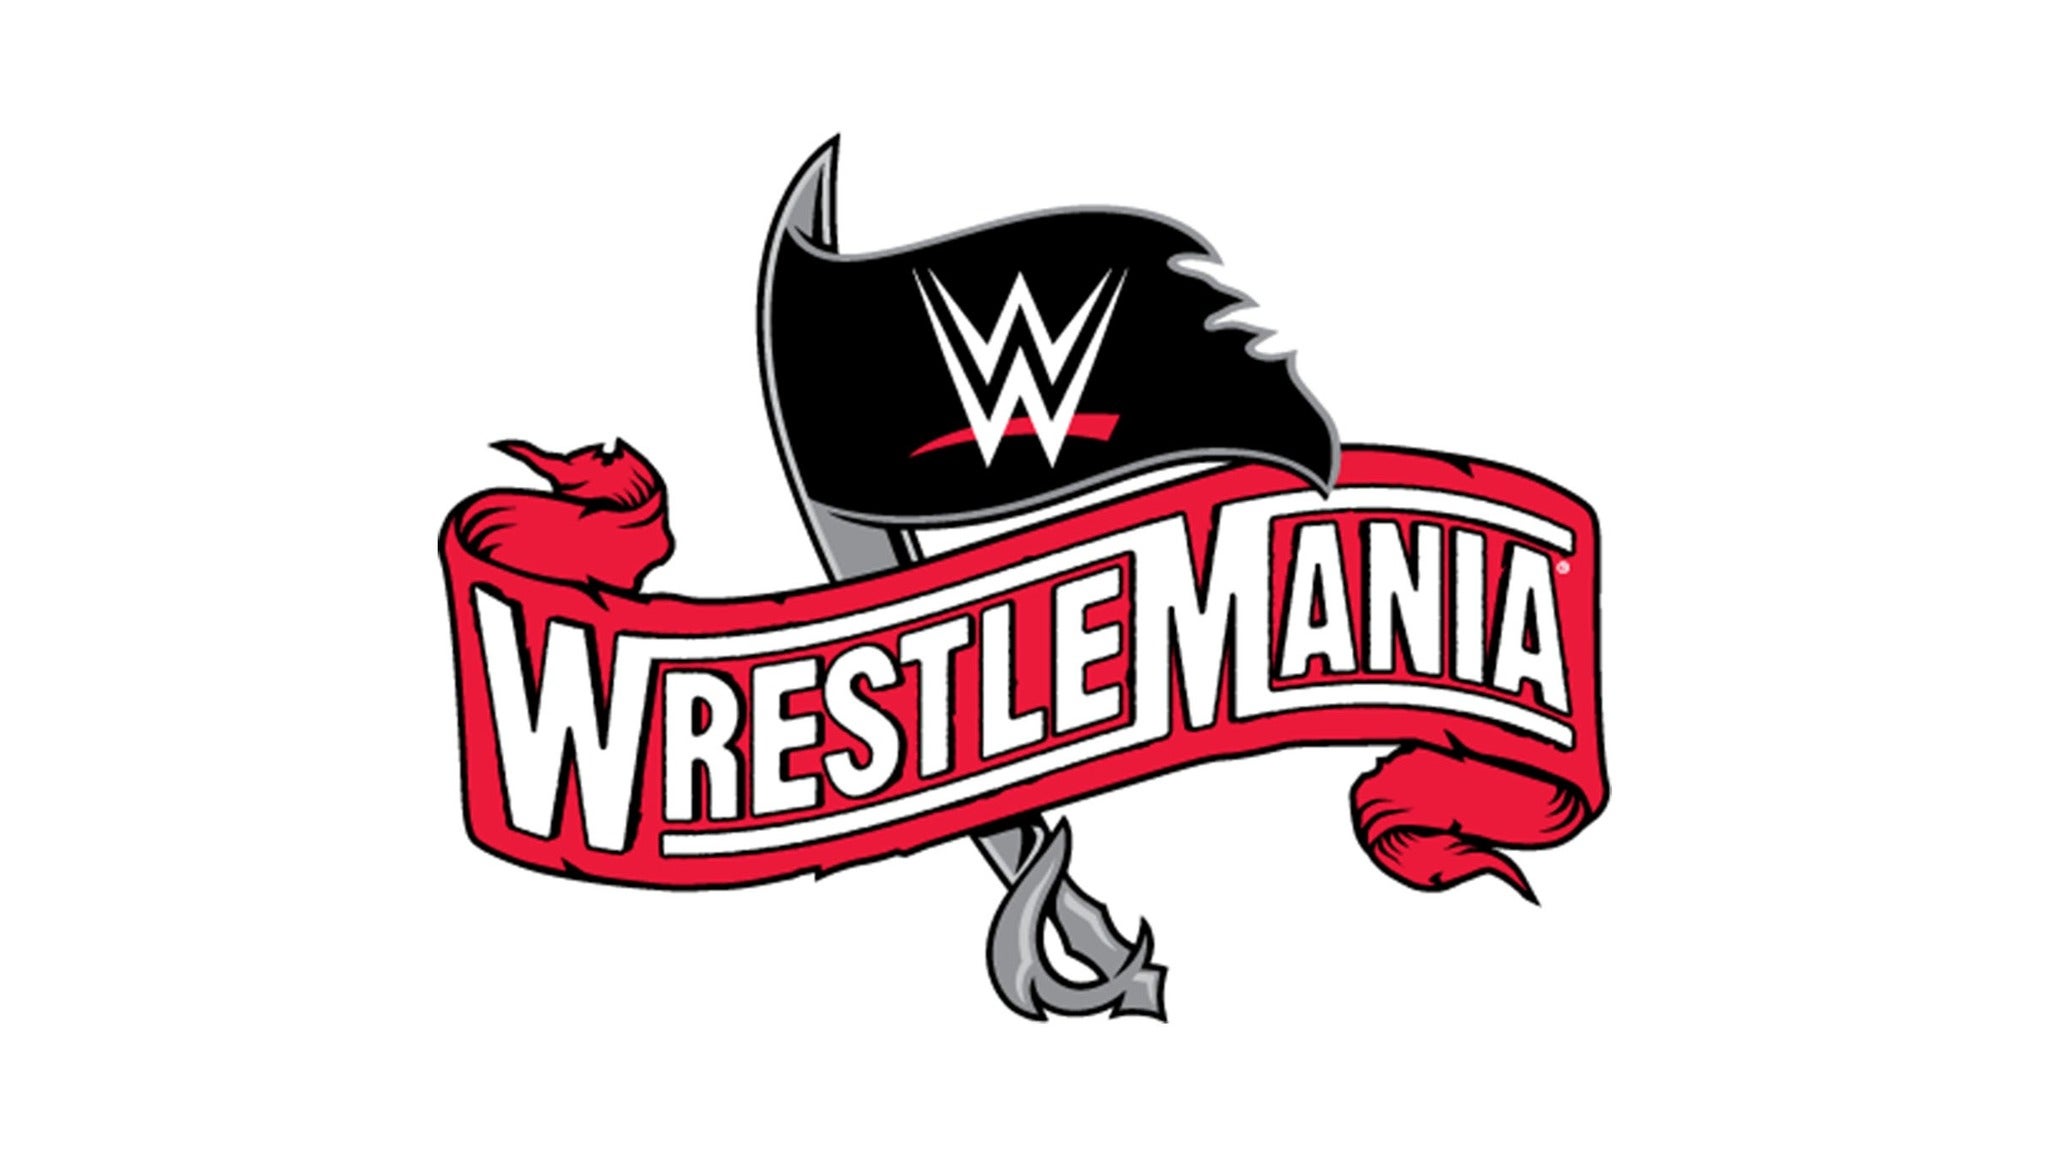 WWE WrestleMania in Tampa promo photo for Internet presale offer code